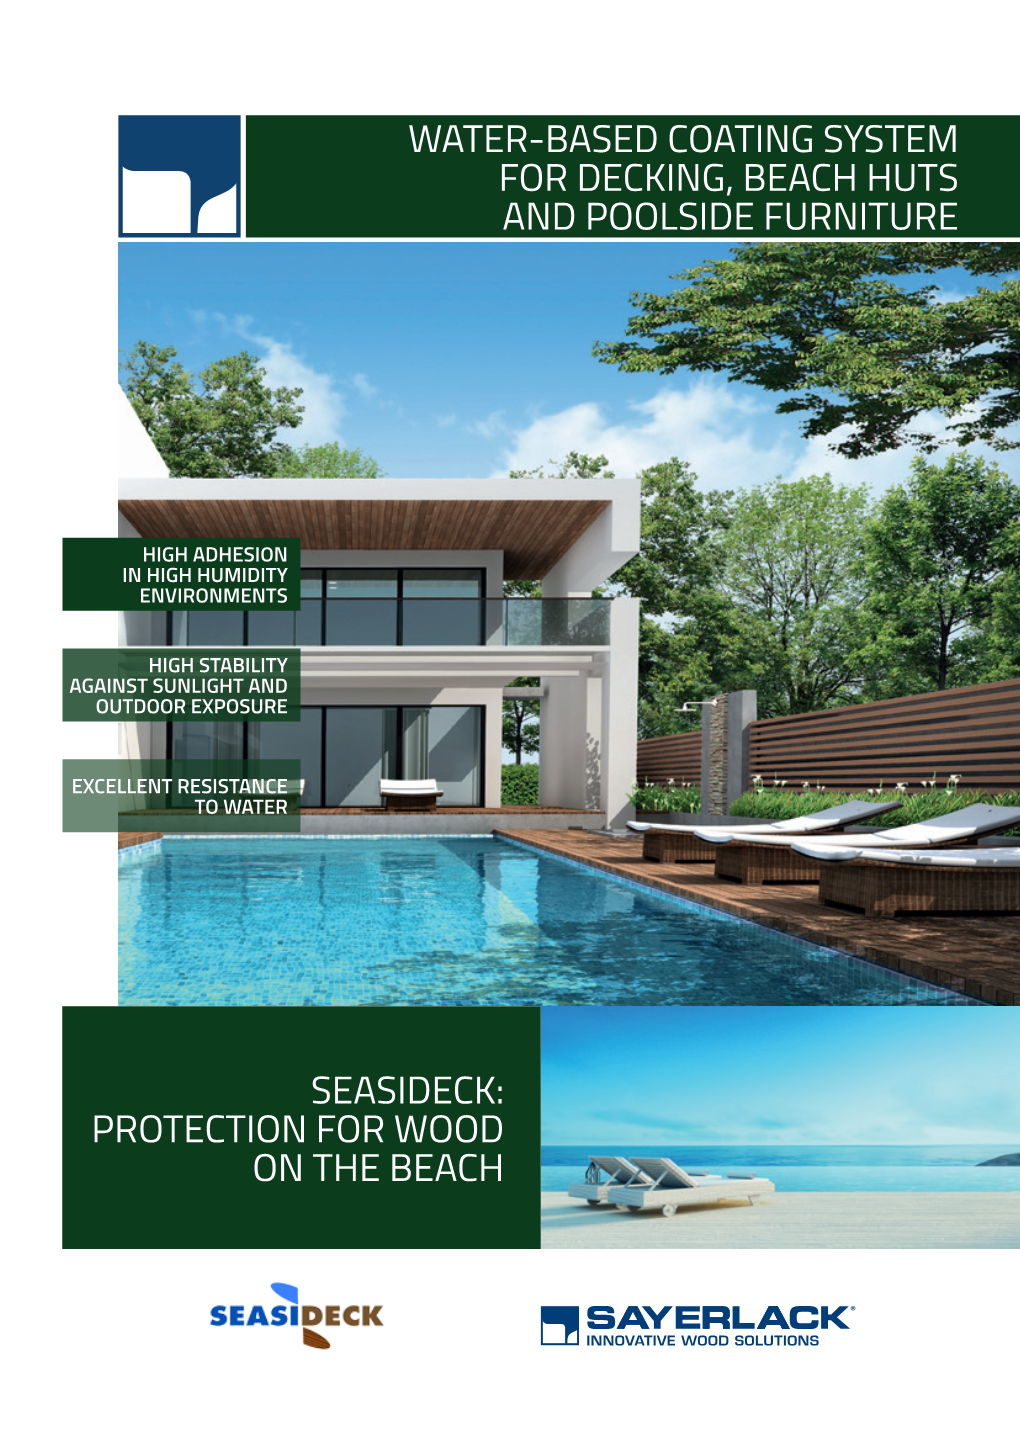 Water-Based Coating System for Decking, Beach Huts and Poolside Furniture